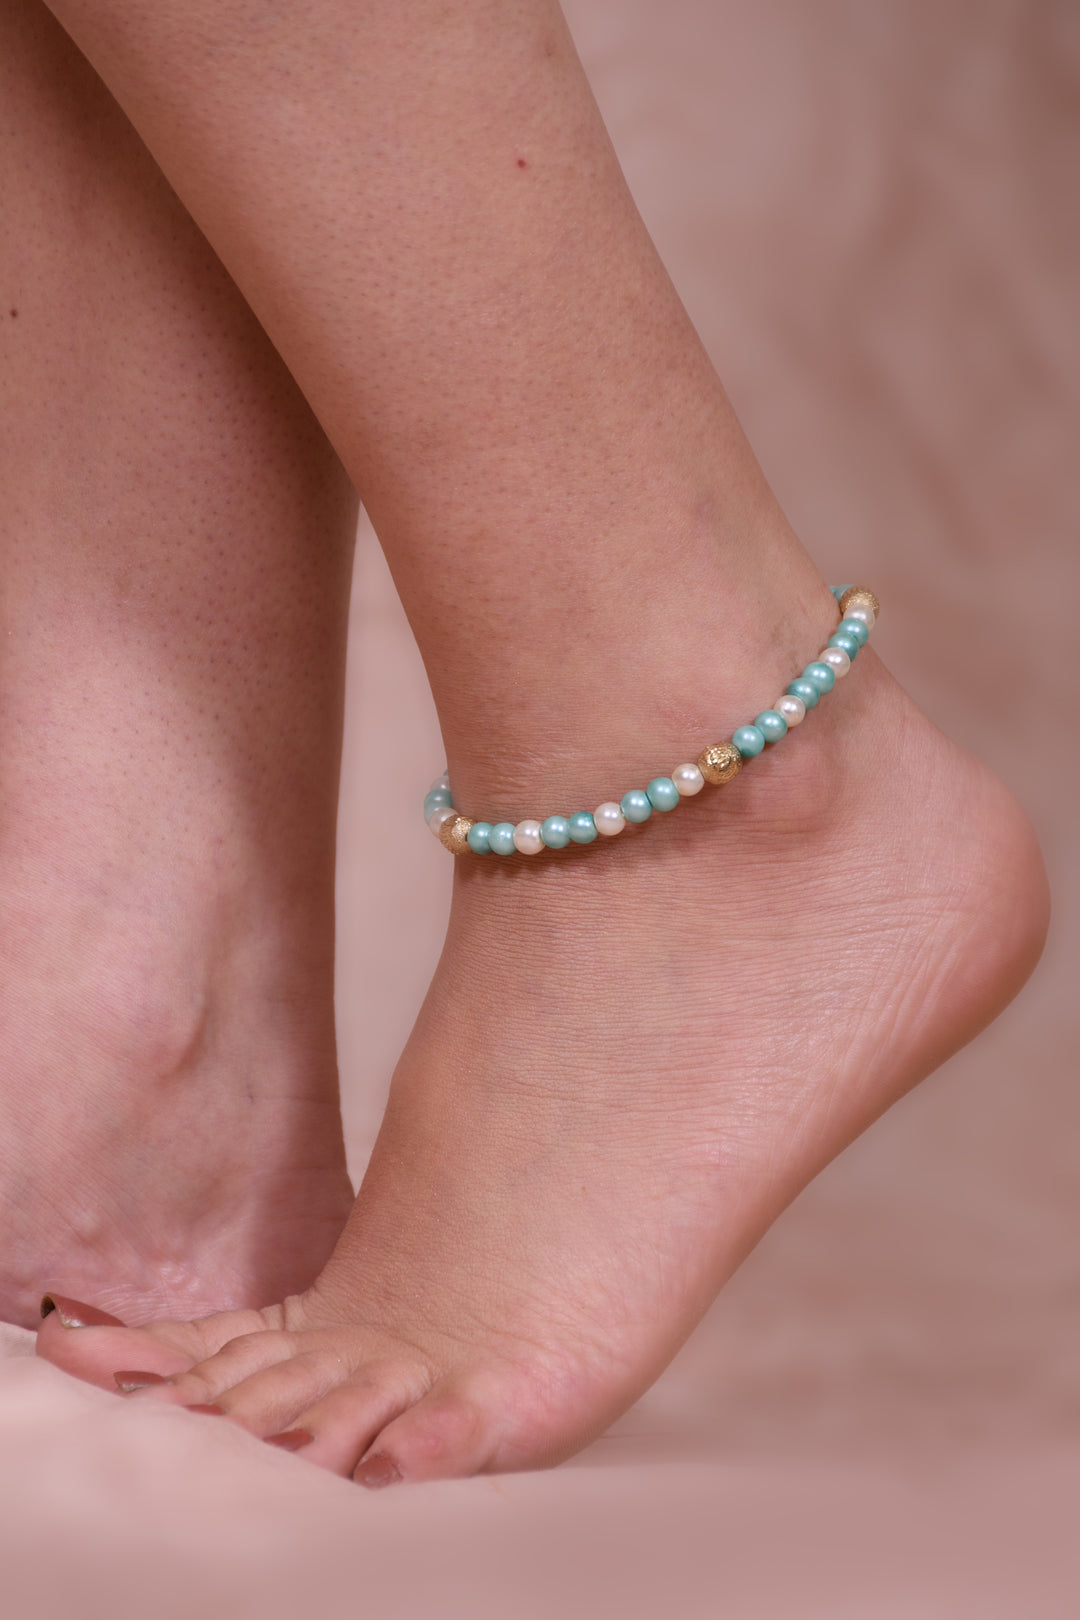 White & Sea Green Pearl Beads Anklet Styled With Metal Beads In It